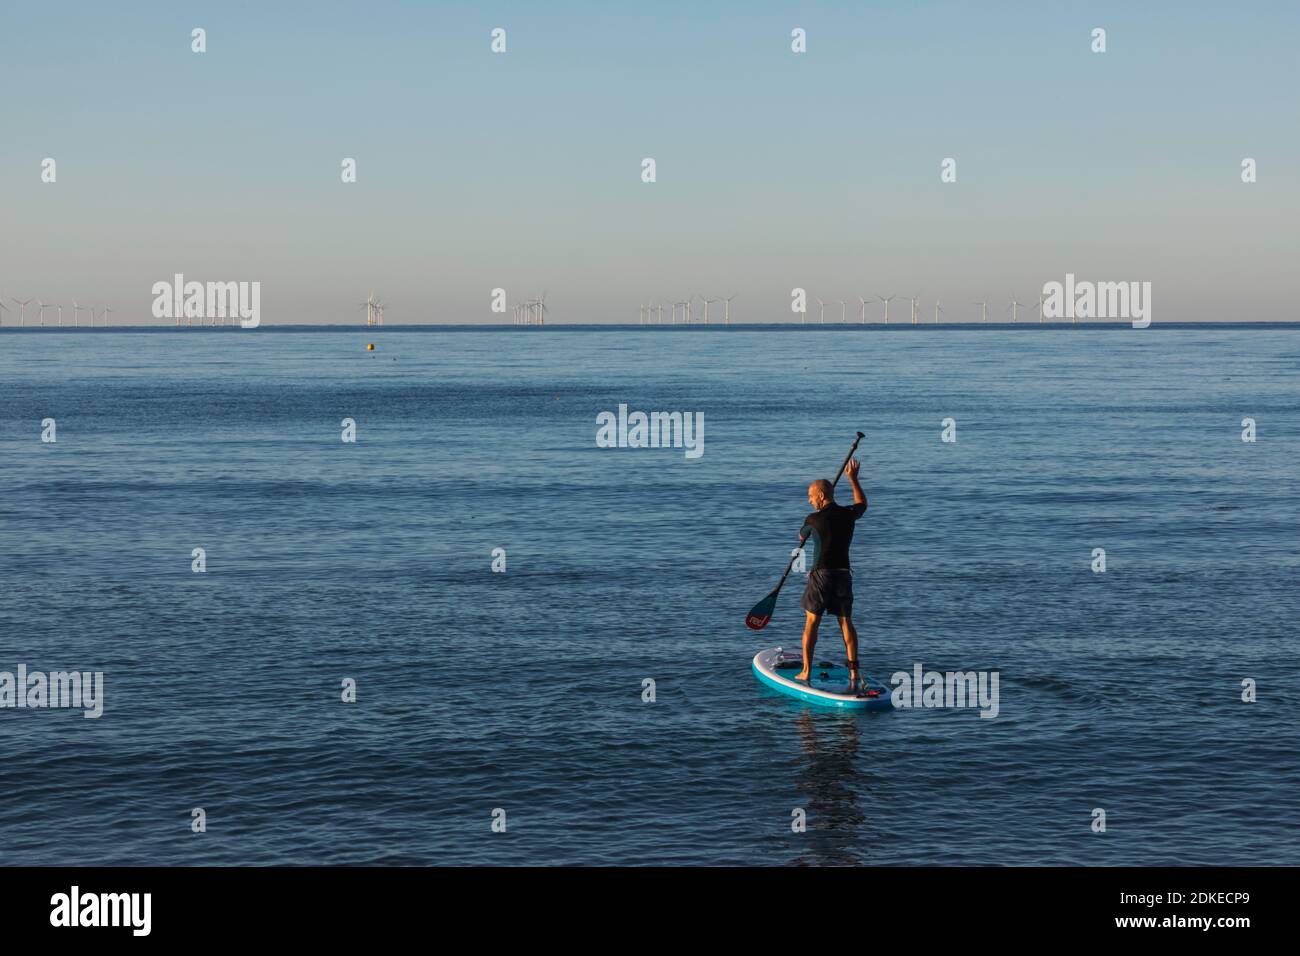 Inghilterra, Sussex occidentale, Worthing, Worthing Beach, paddle Boarder sul mare calmo Foto Stock